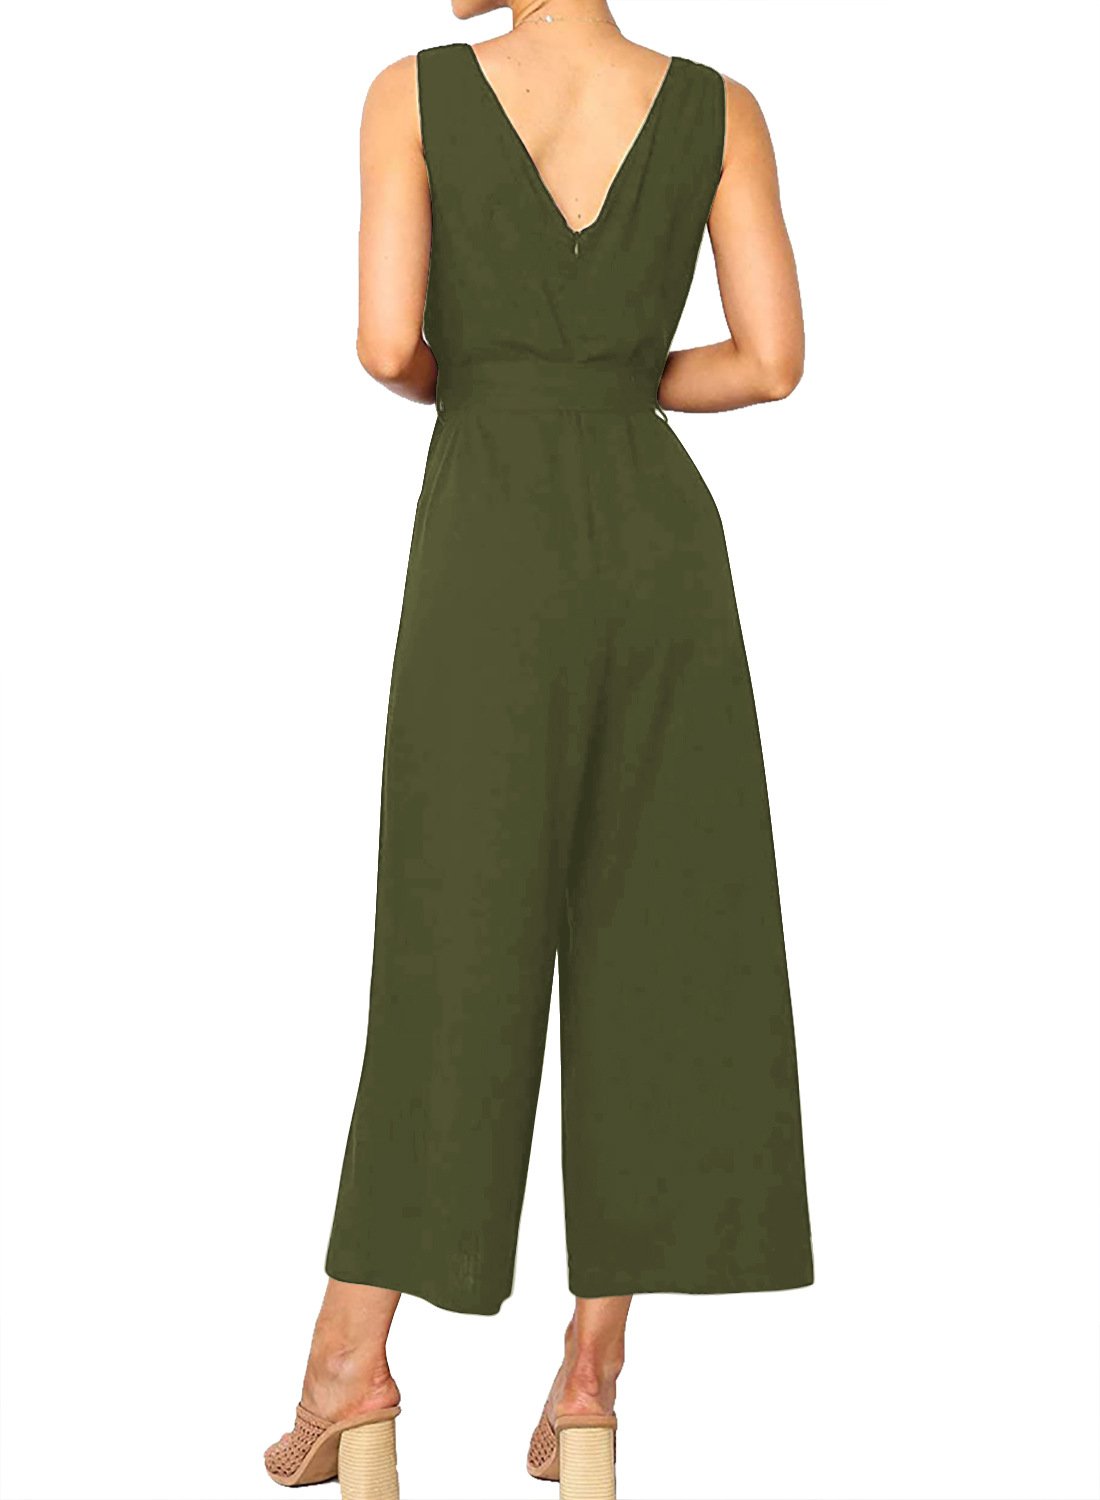 Sexy Cuasual Women Jumpsuits with Belt-STYLEGOING